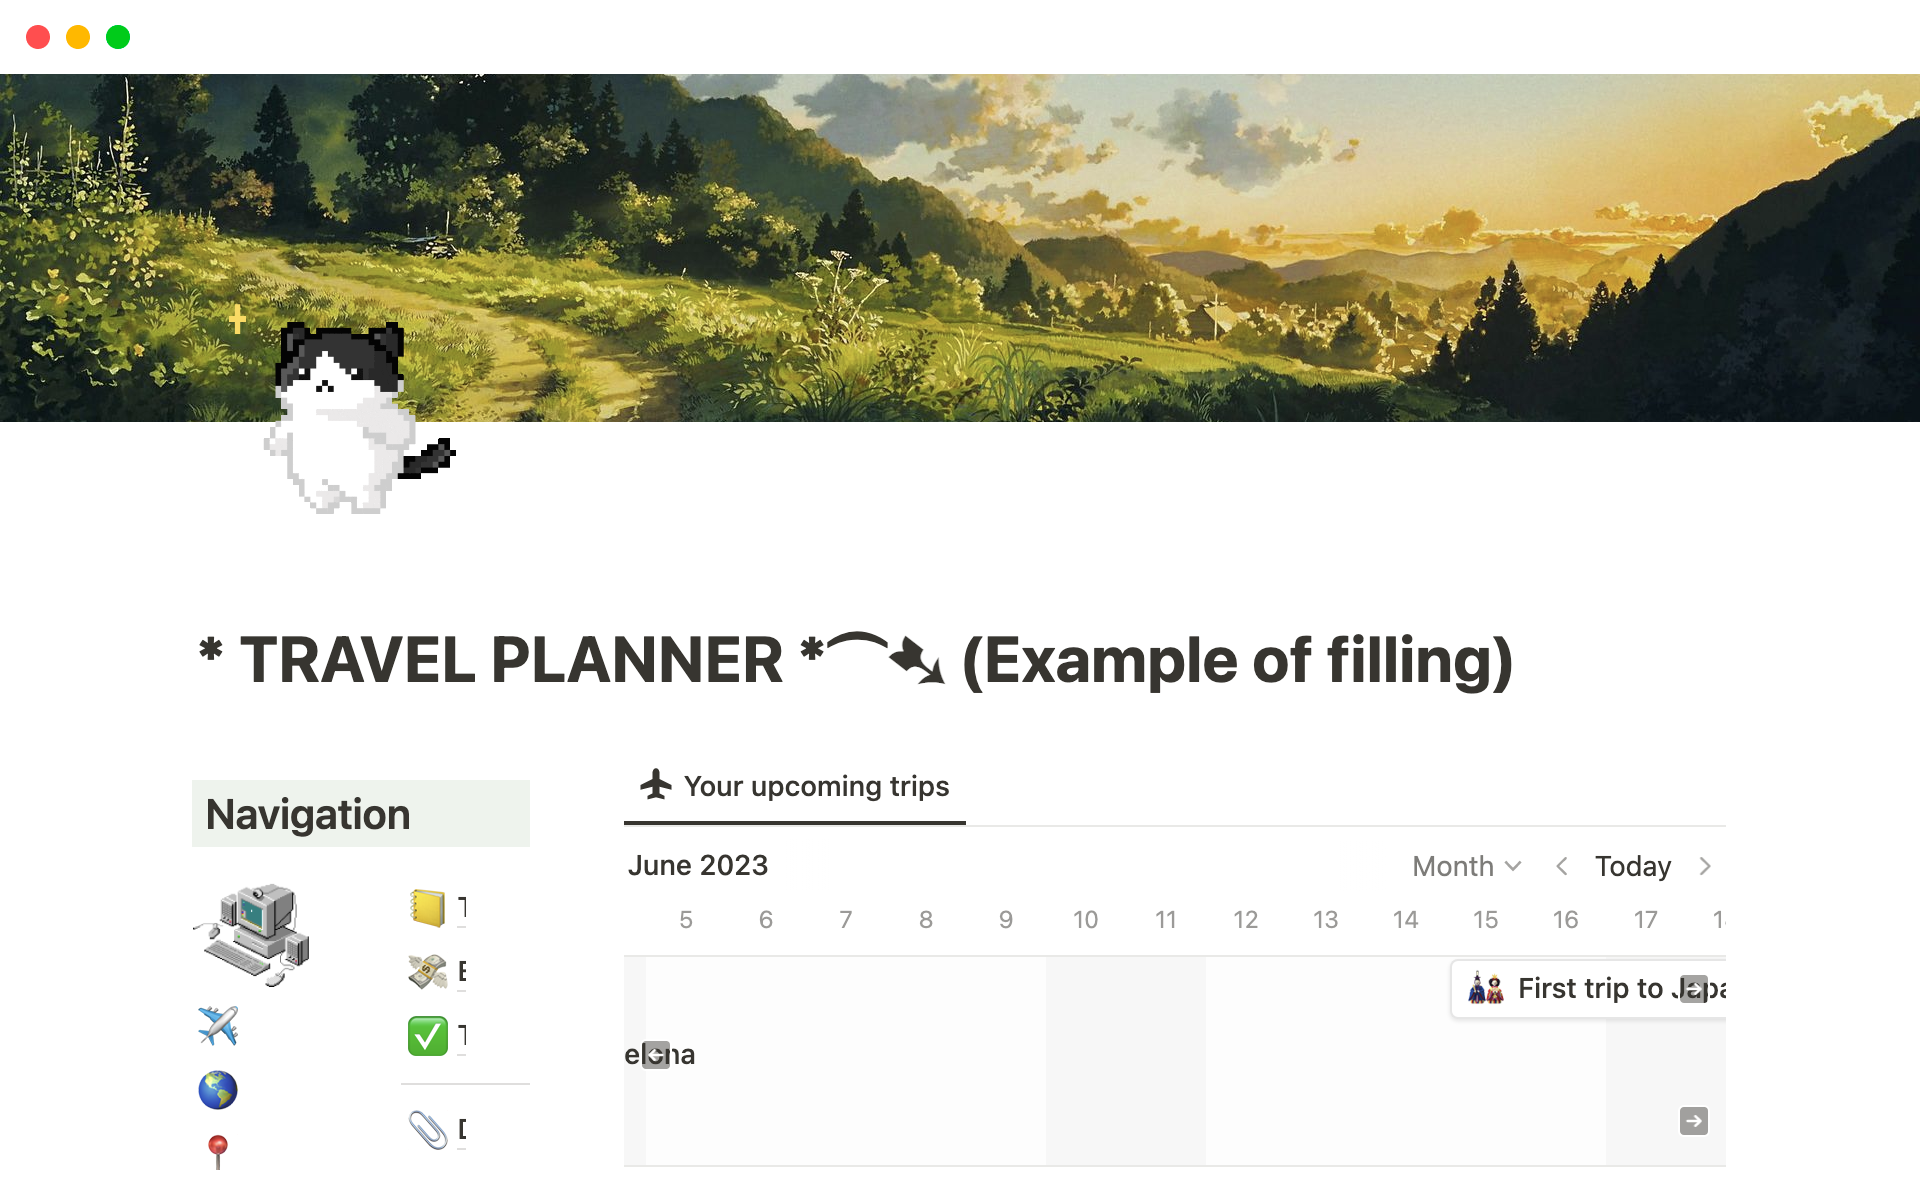 Travel Planner streamlines travel planning with 10 databases, dedicated pages for each trip, and curated showcases of places and experiences